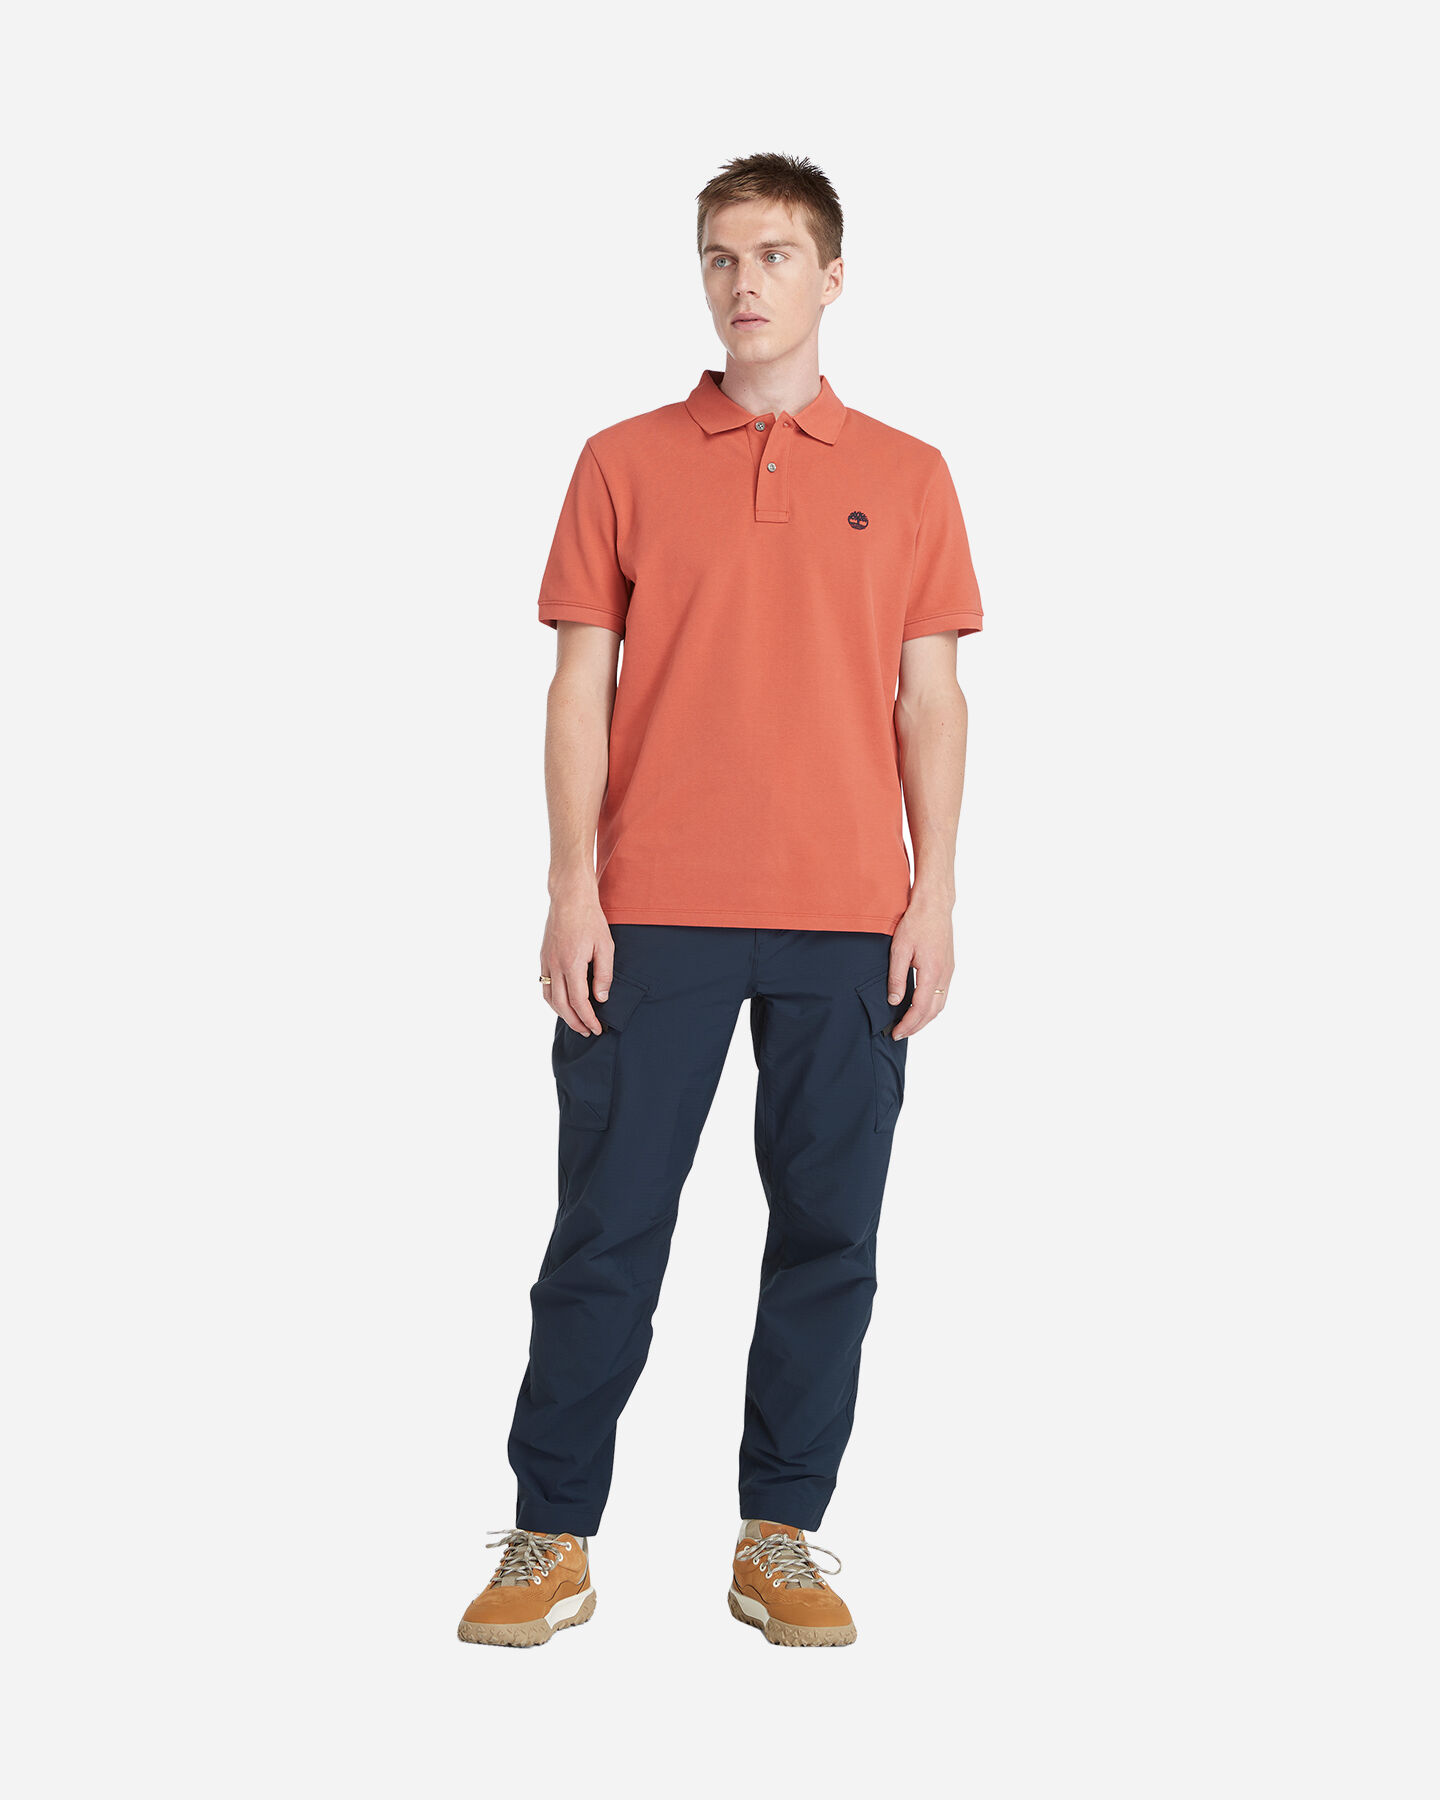  Polo TIMBERLAND MILLERS RIVER M S4131478|EG61|S scatto 3